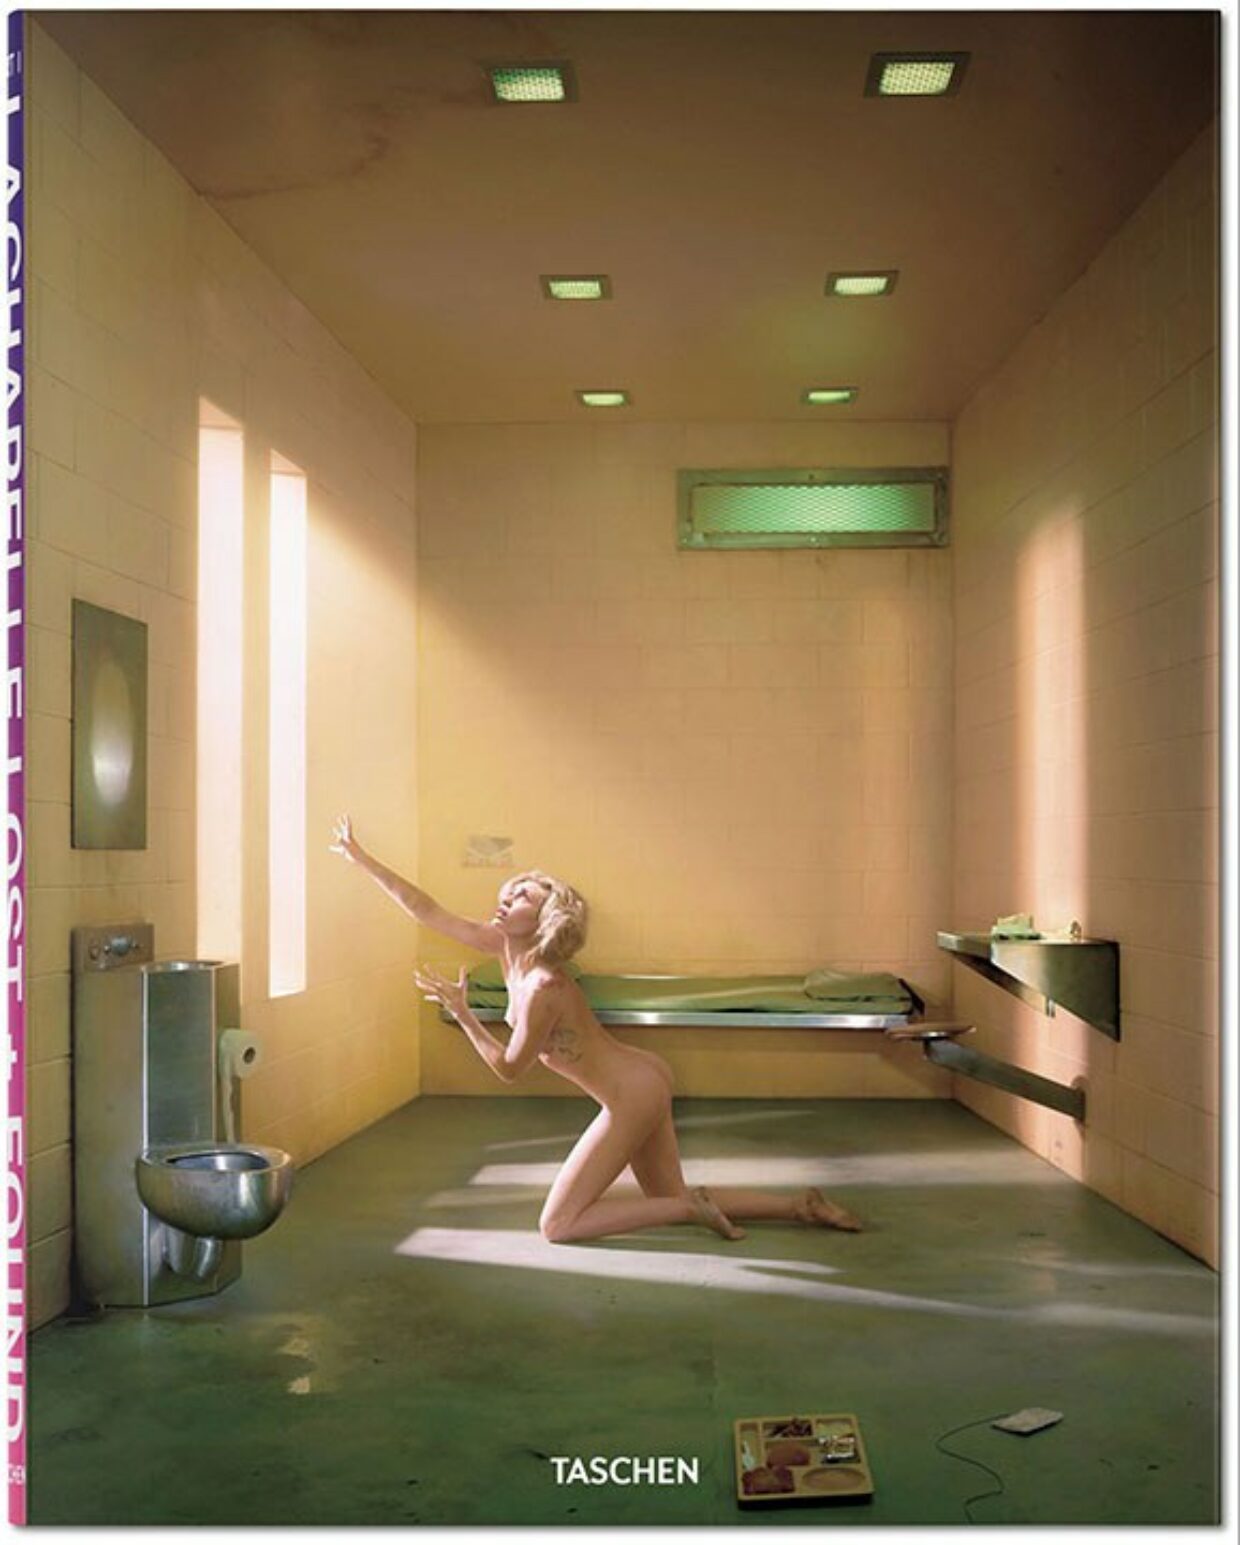 David LaChapelle Shot Miley Cyrus as a Naked Prison Fairy for the Cover of his New Book | 2